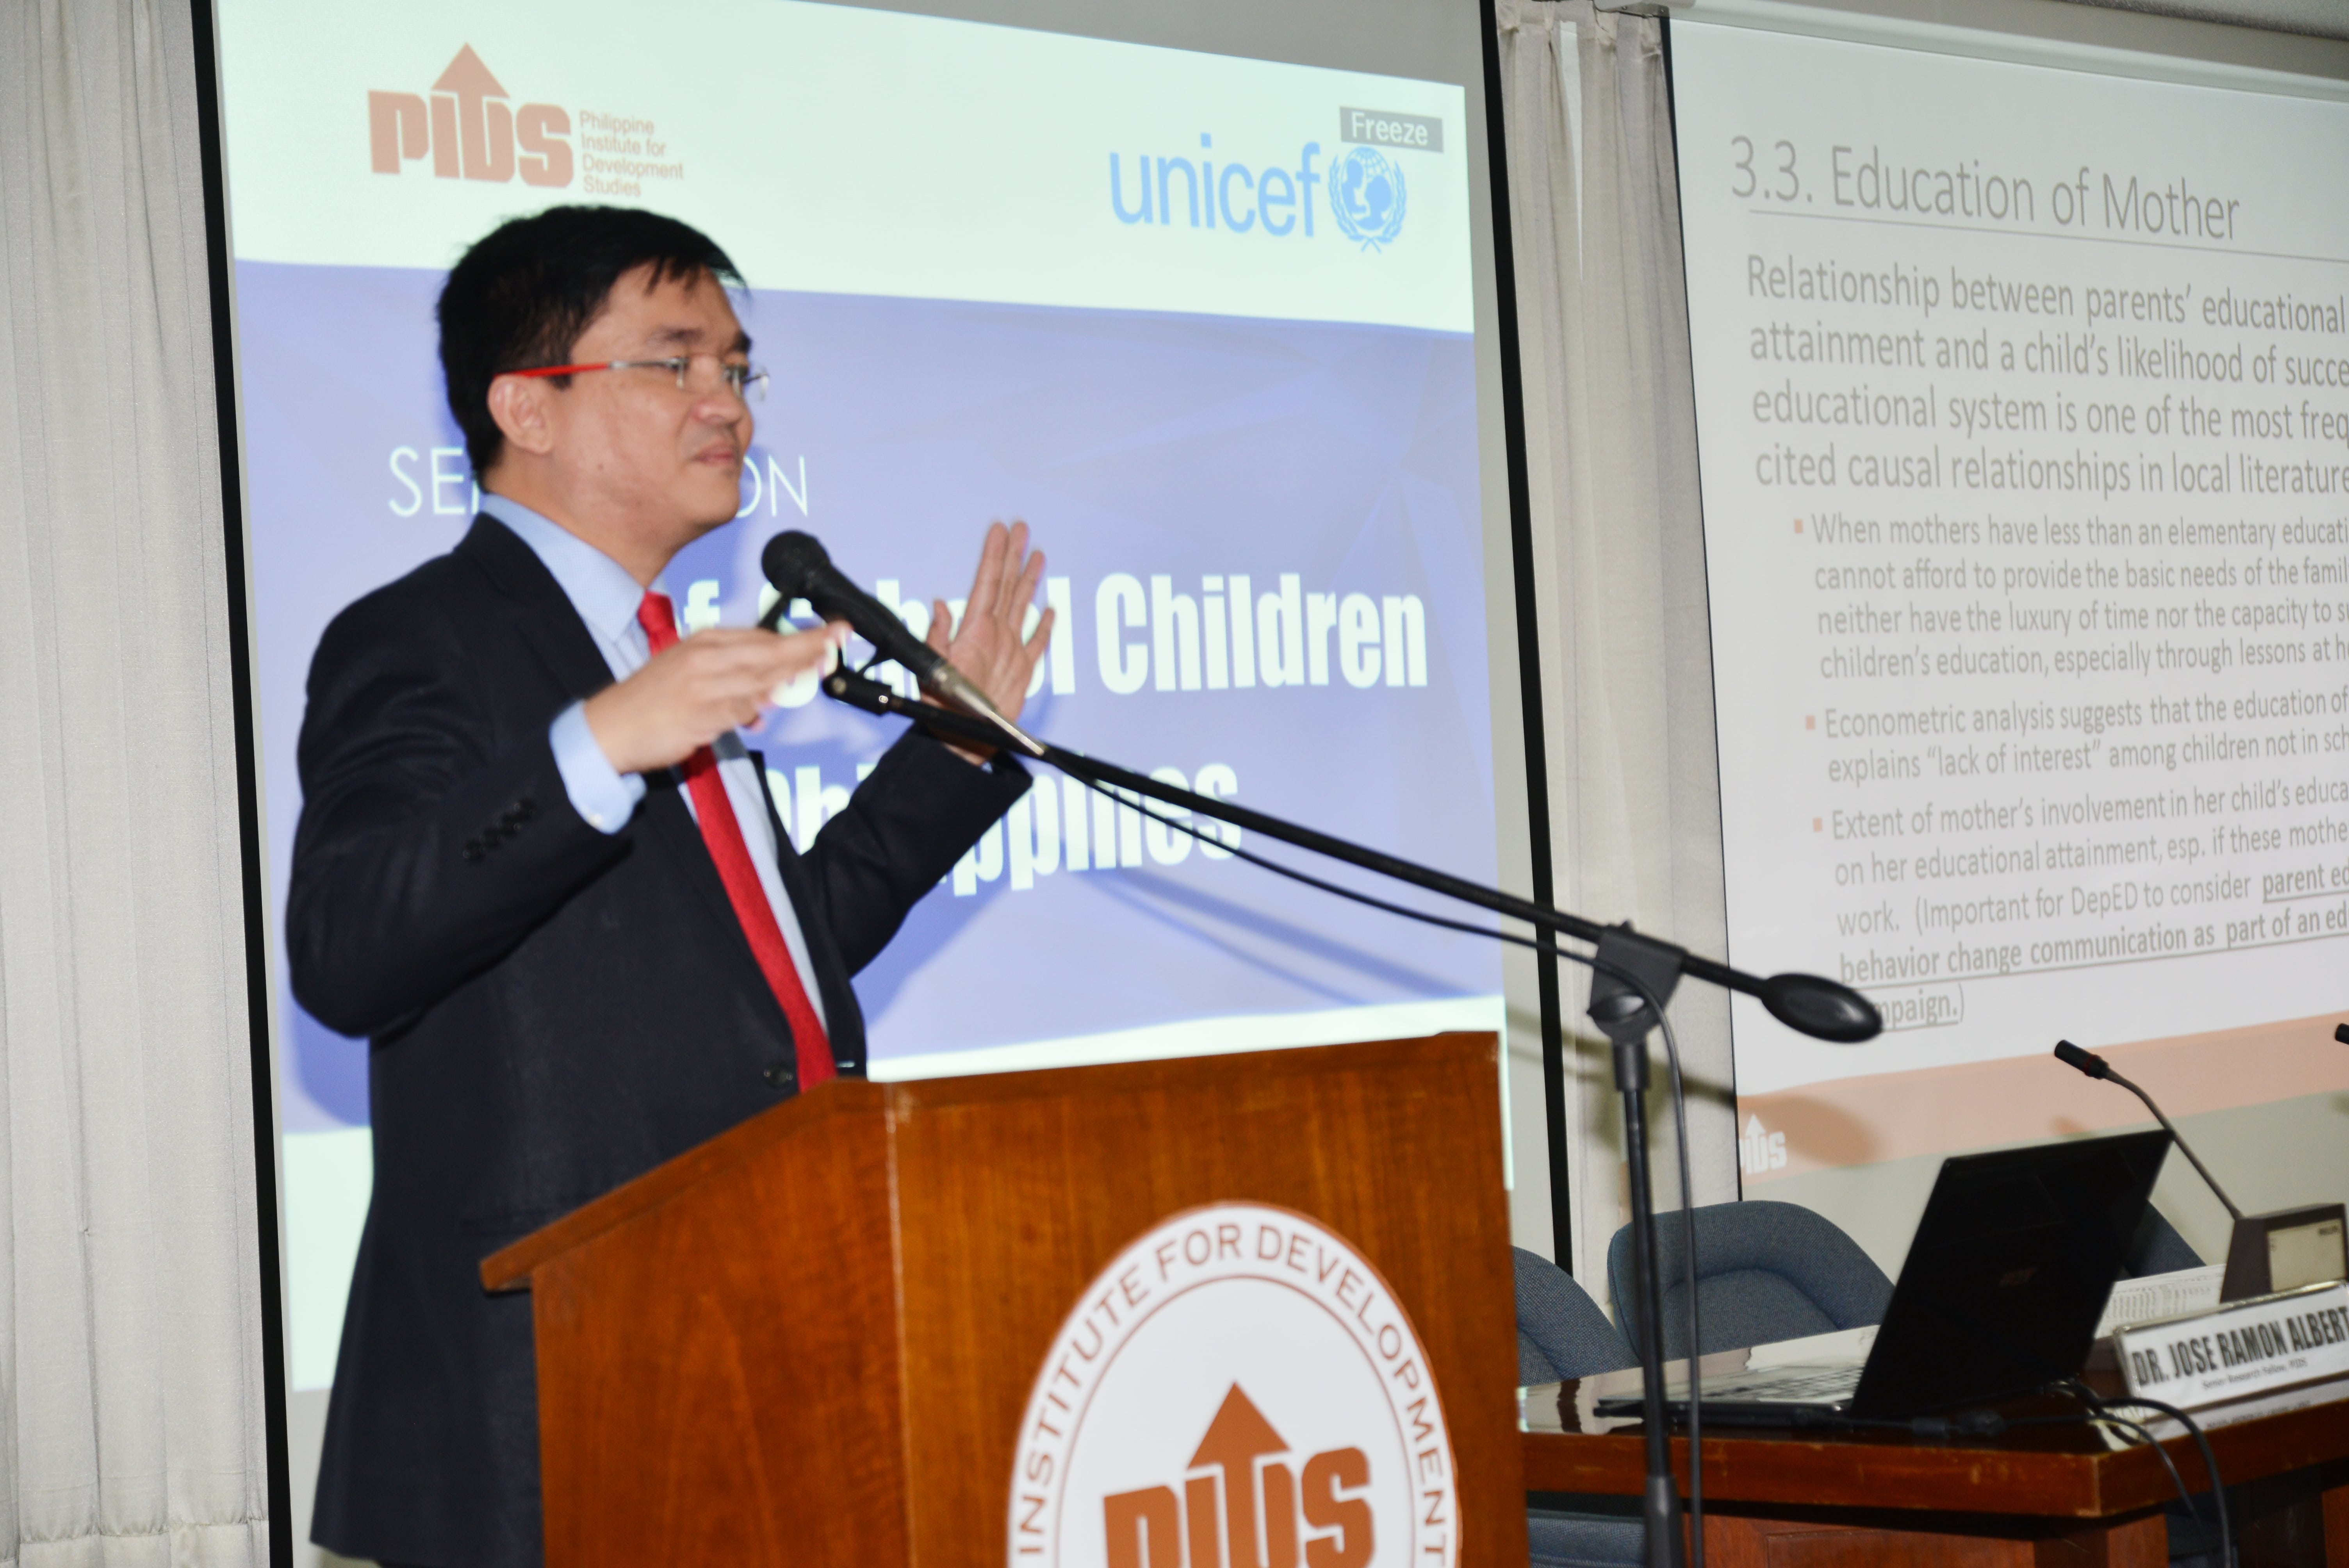 Seminar On Out-Of-School Children (OOSC) In The Philippines-DSC_3101.jpg